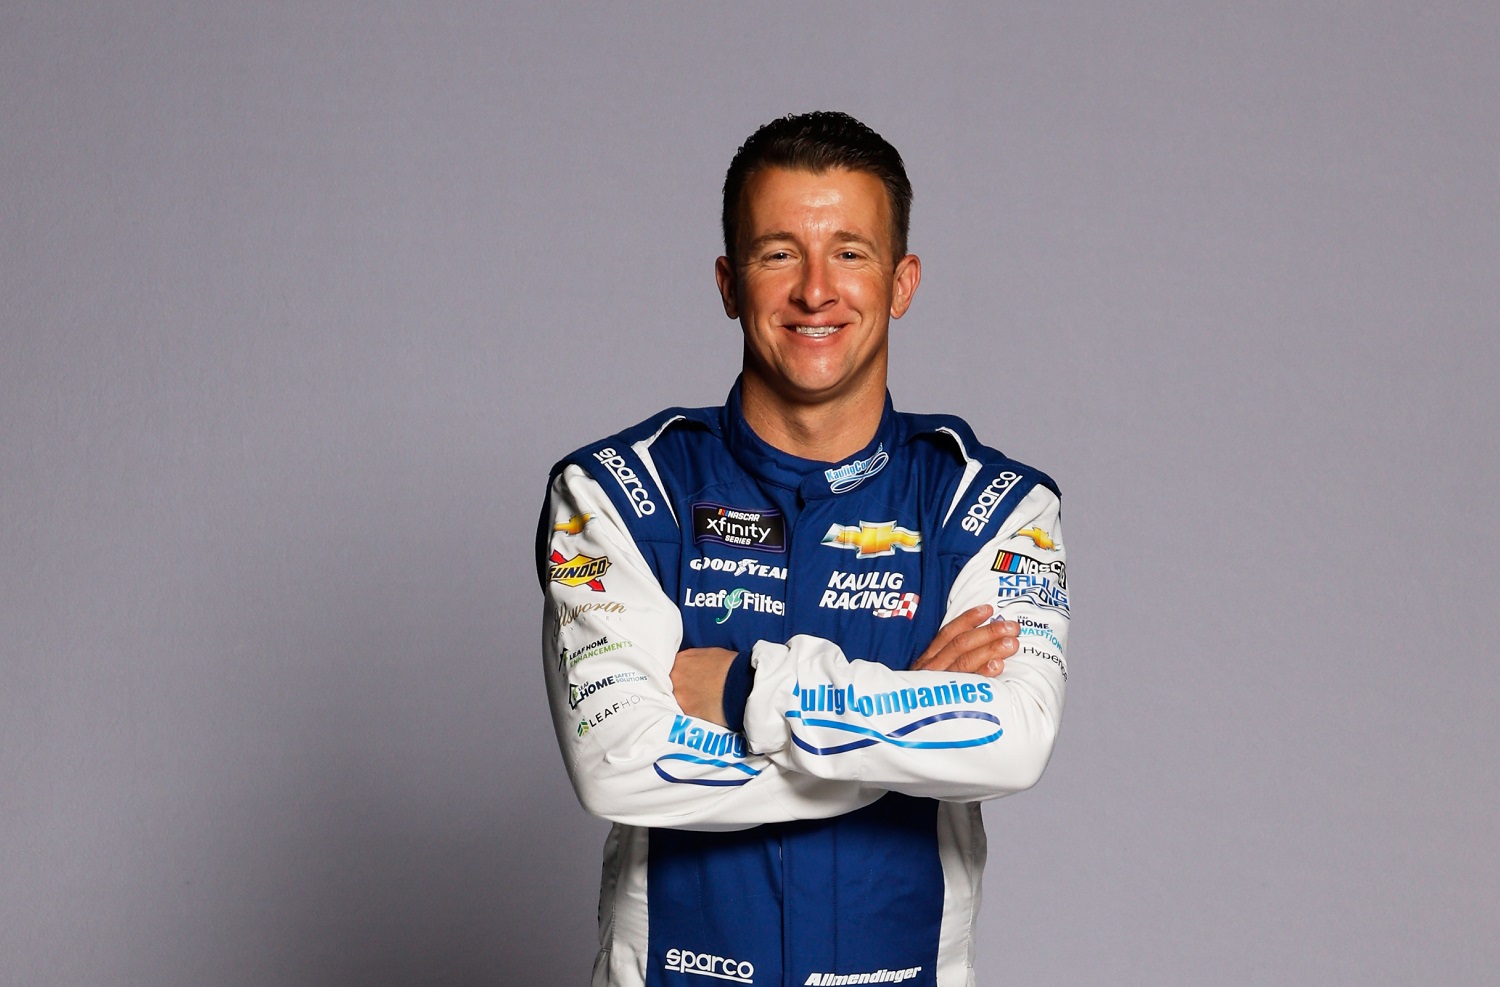 AJ Allmendinger of Kaulig Racing poses for a photo during NASCAR Production Days at Clutch Studios on Jan. 18, 2022, in Concord, North Carolina.